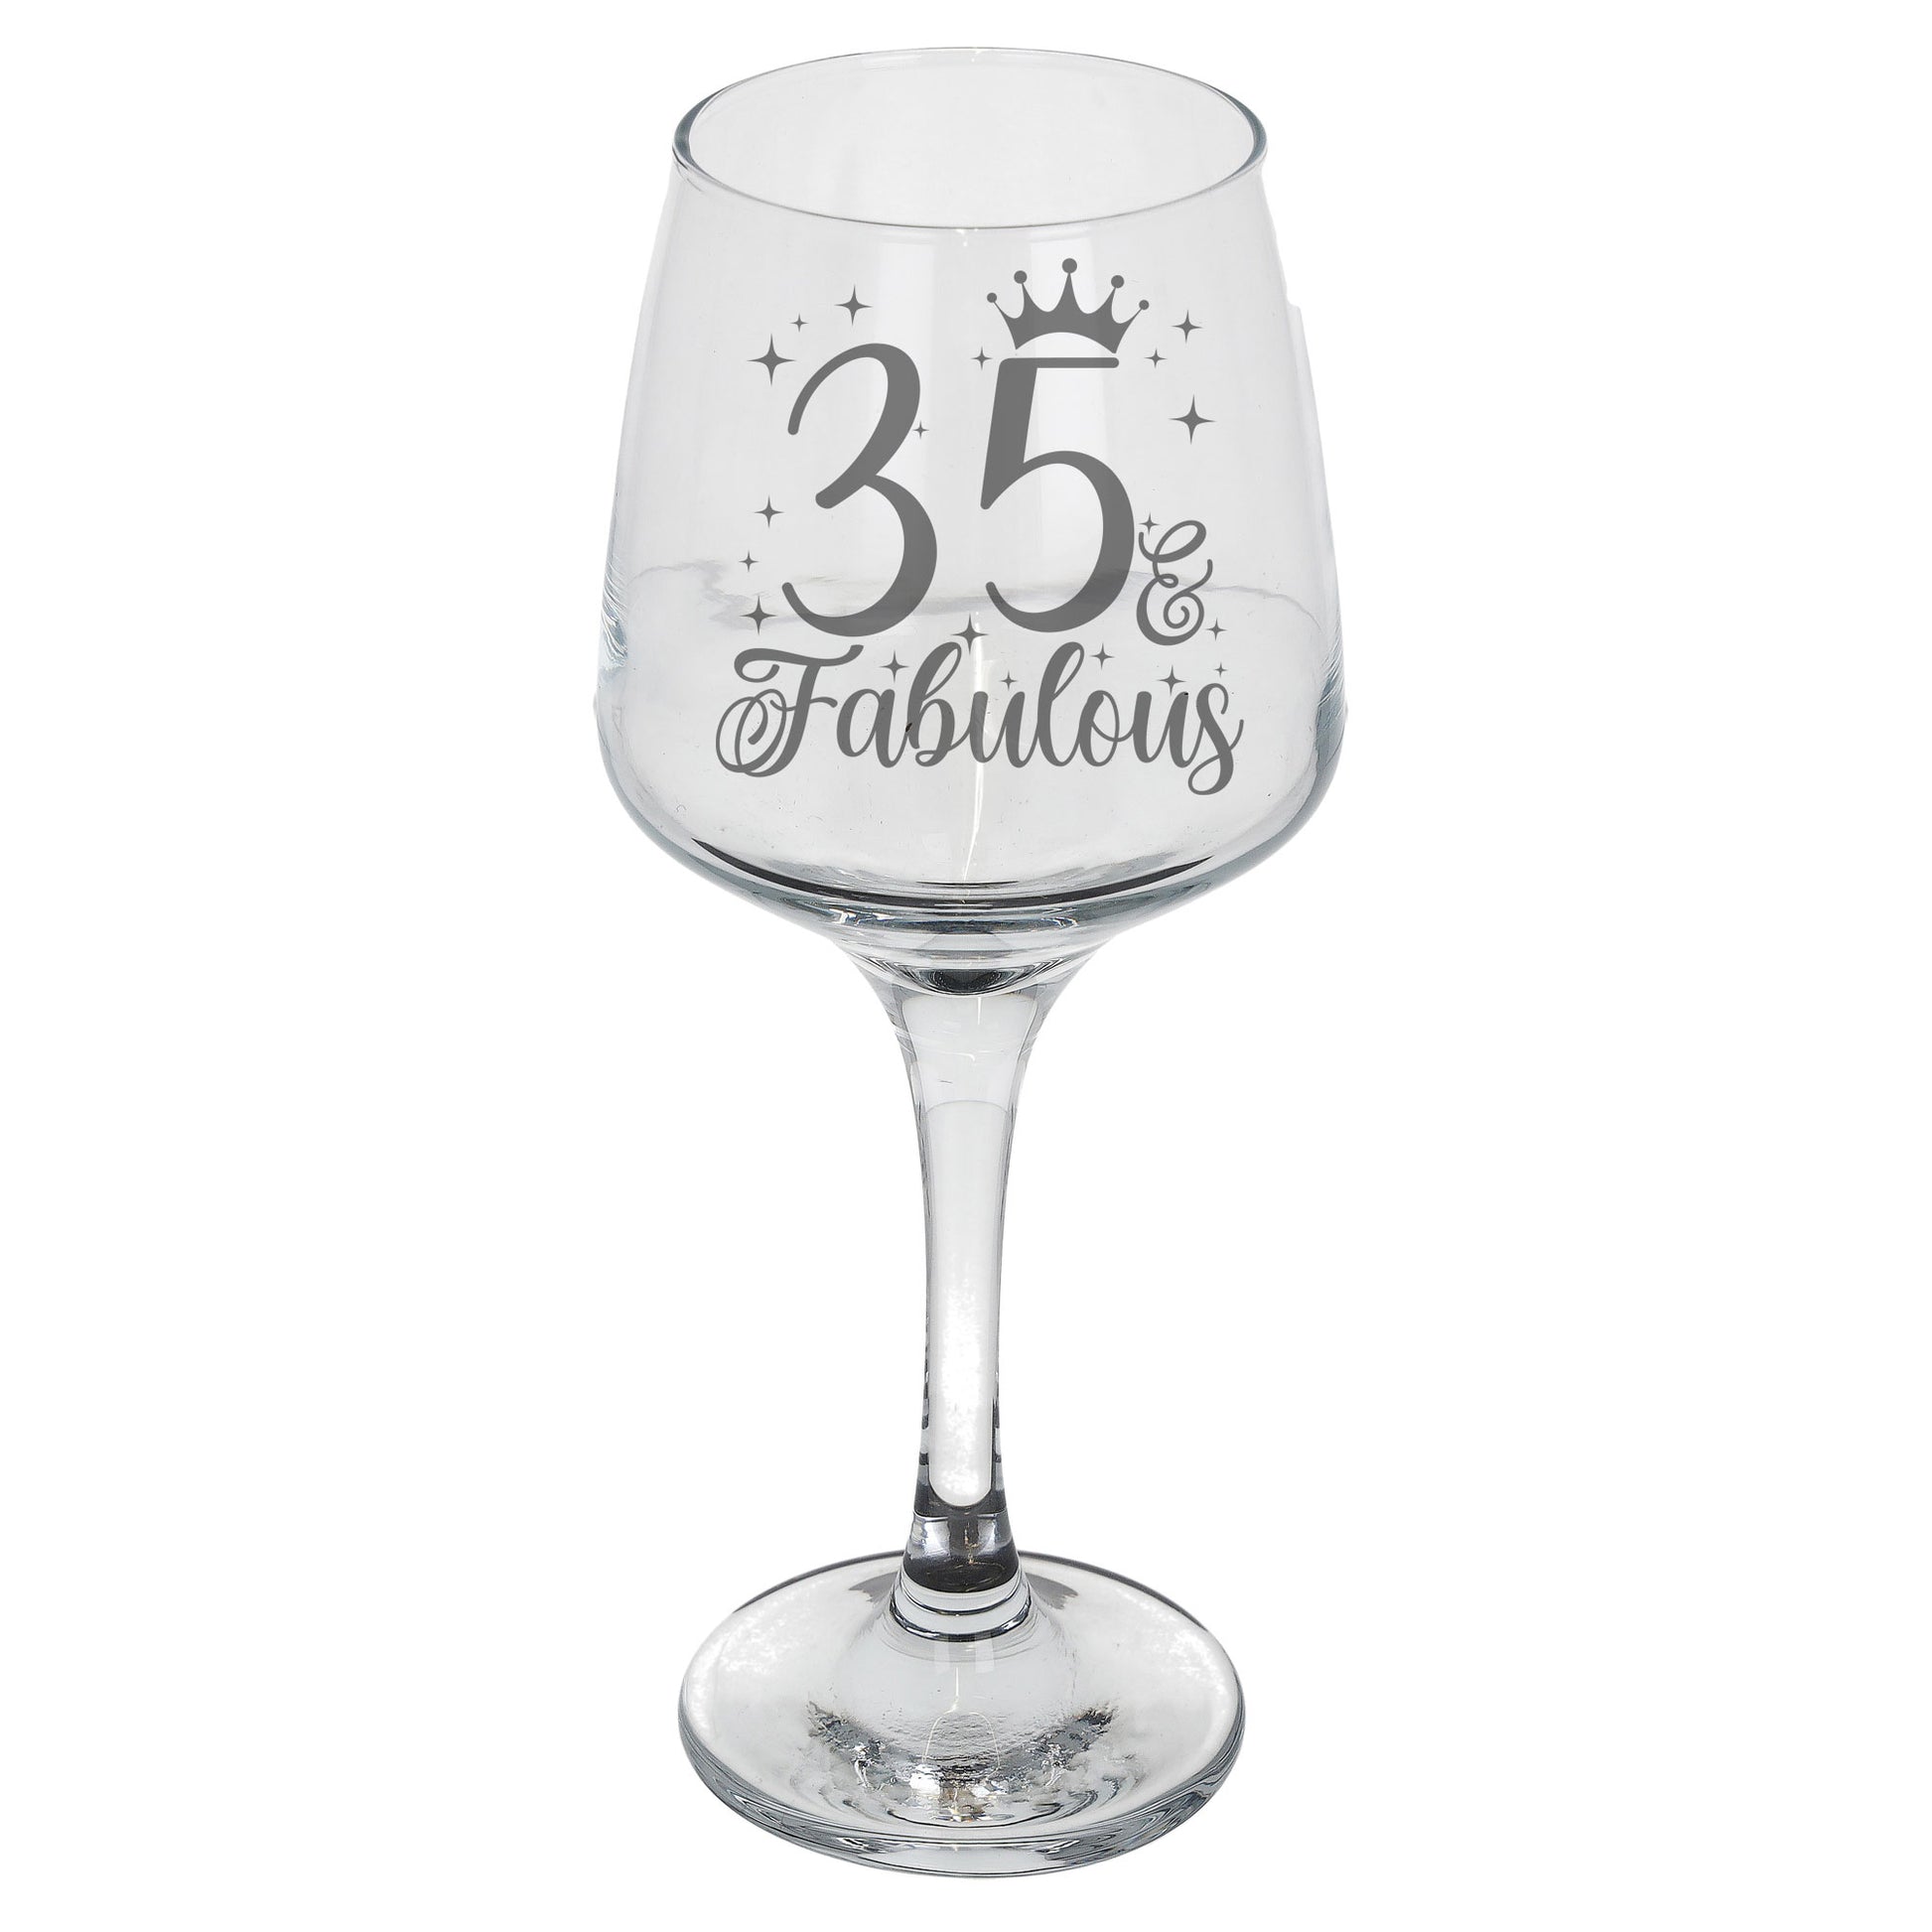 35 & Fabulous 35th Birthday Gift Engraved Wine Glass and/or Coaster Set  - Always Looking Good -   